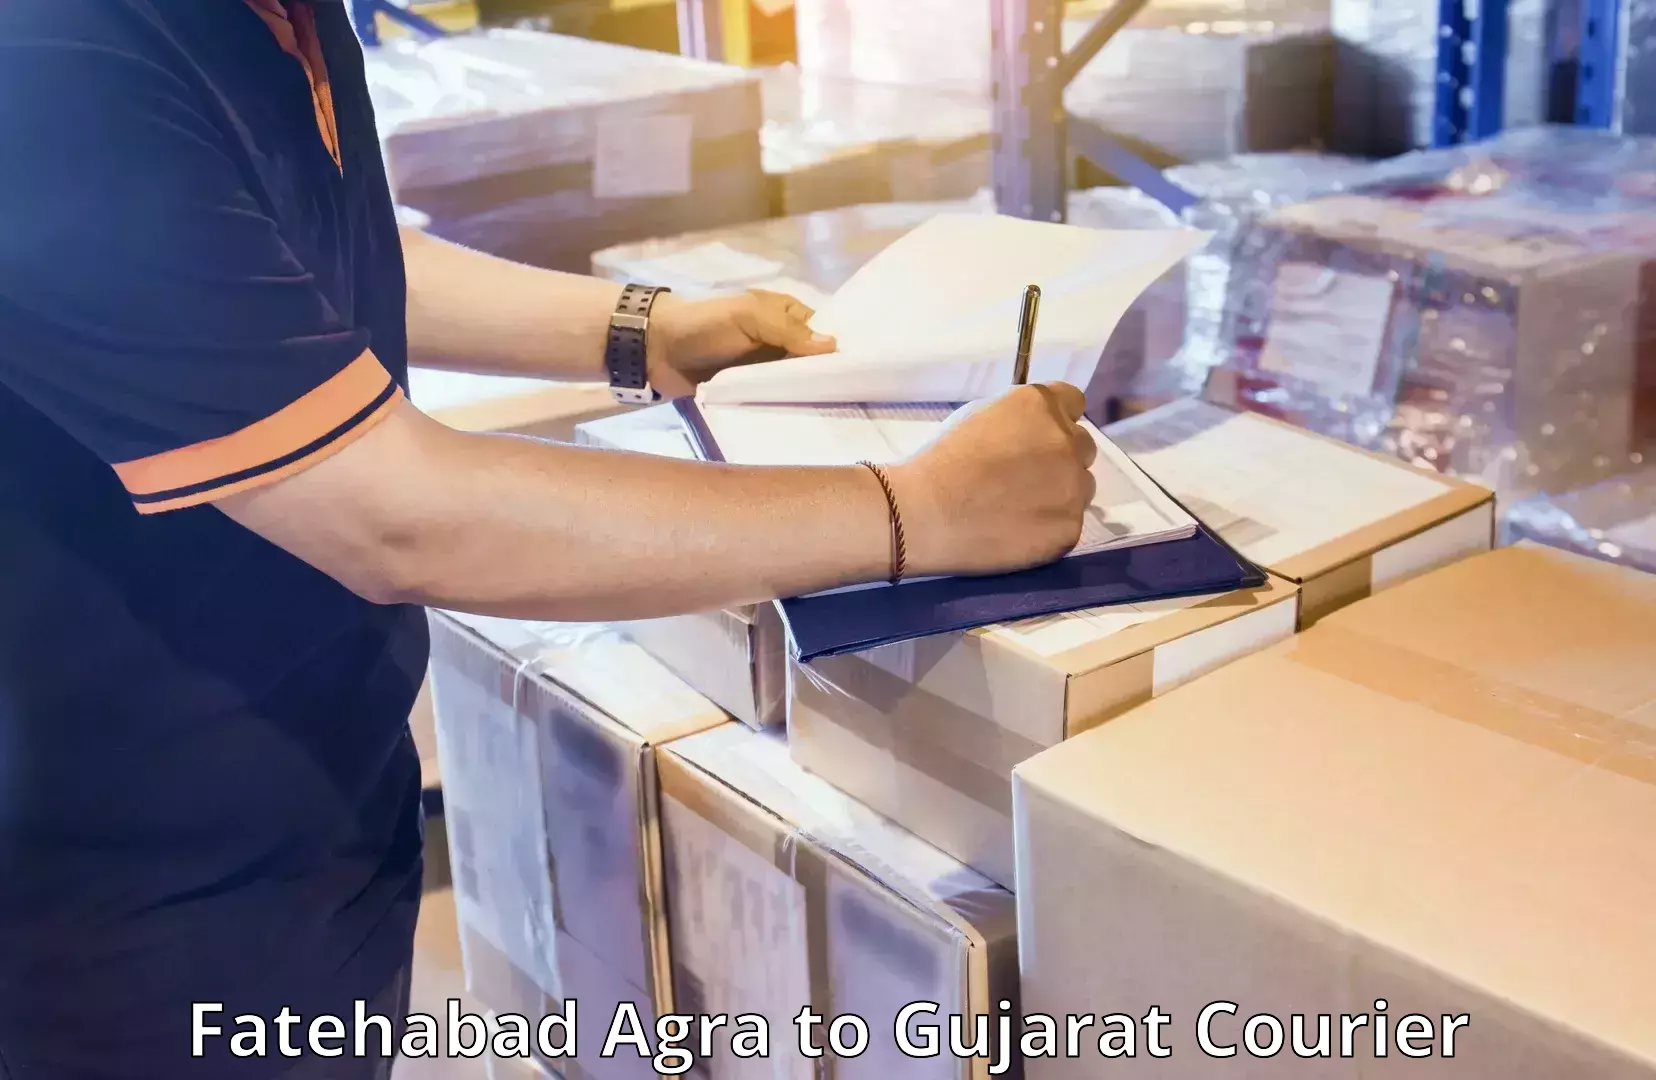 Instant baggage transport quote Fatehabad Agra to Gujarat